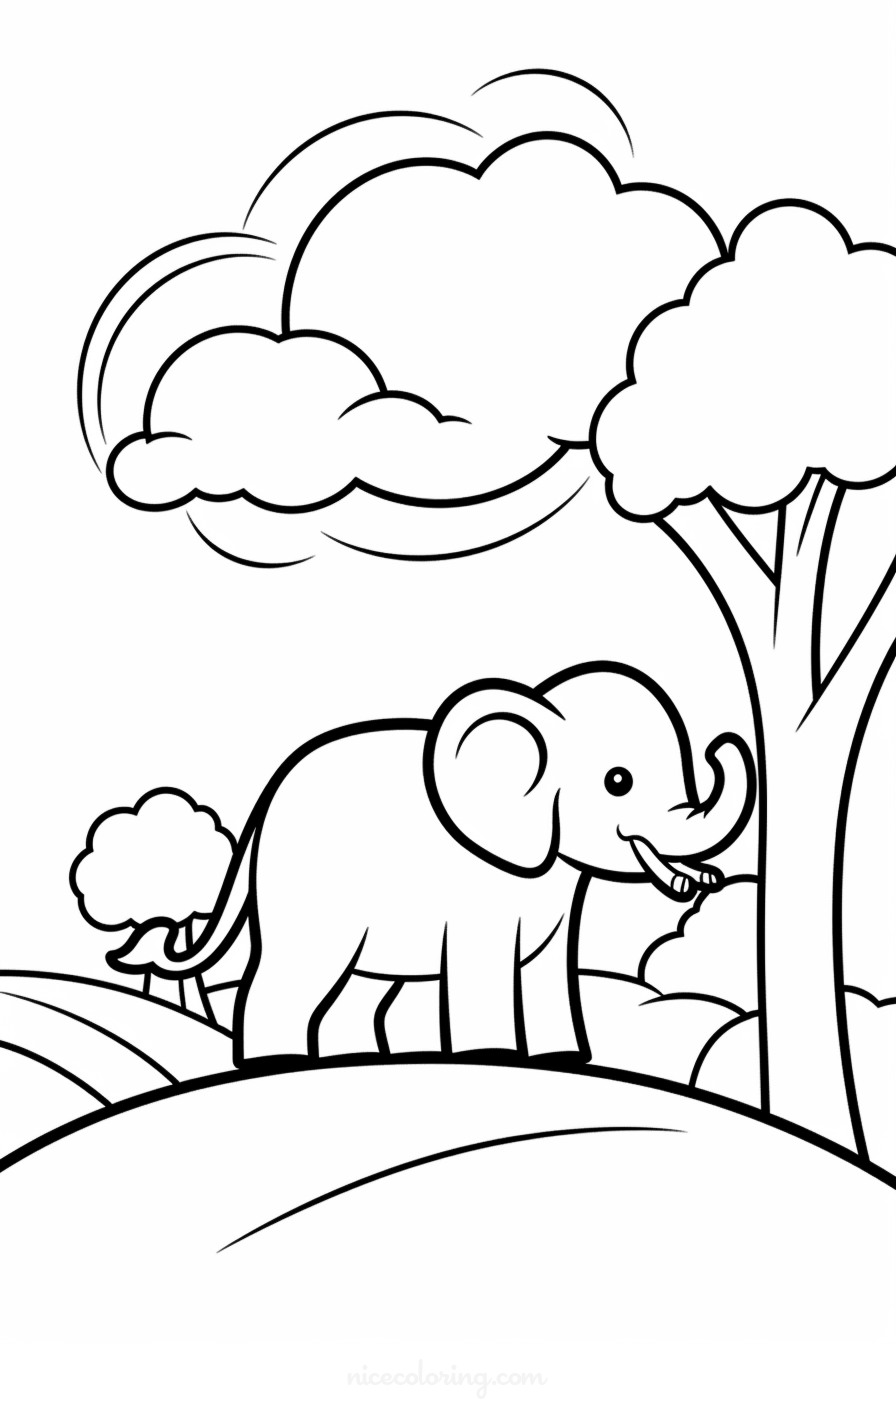 Elephant family in a natural scene coloring page